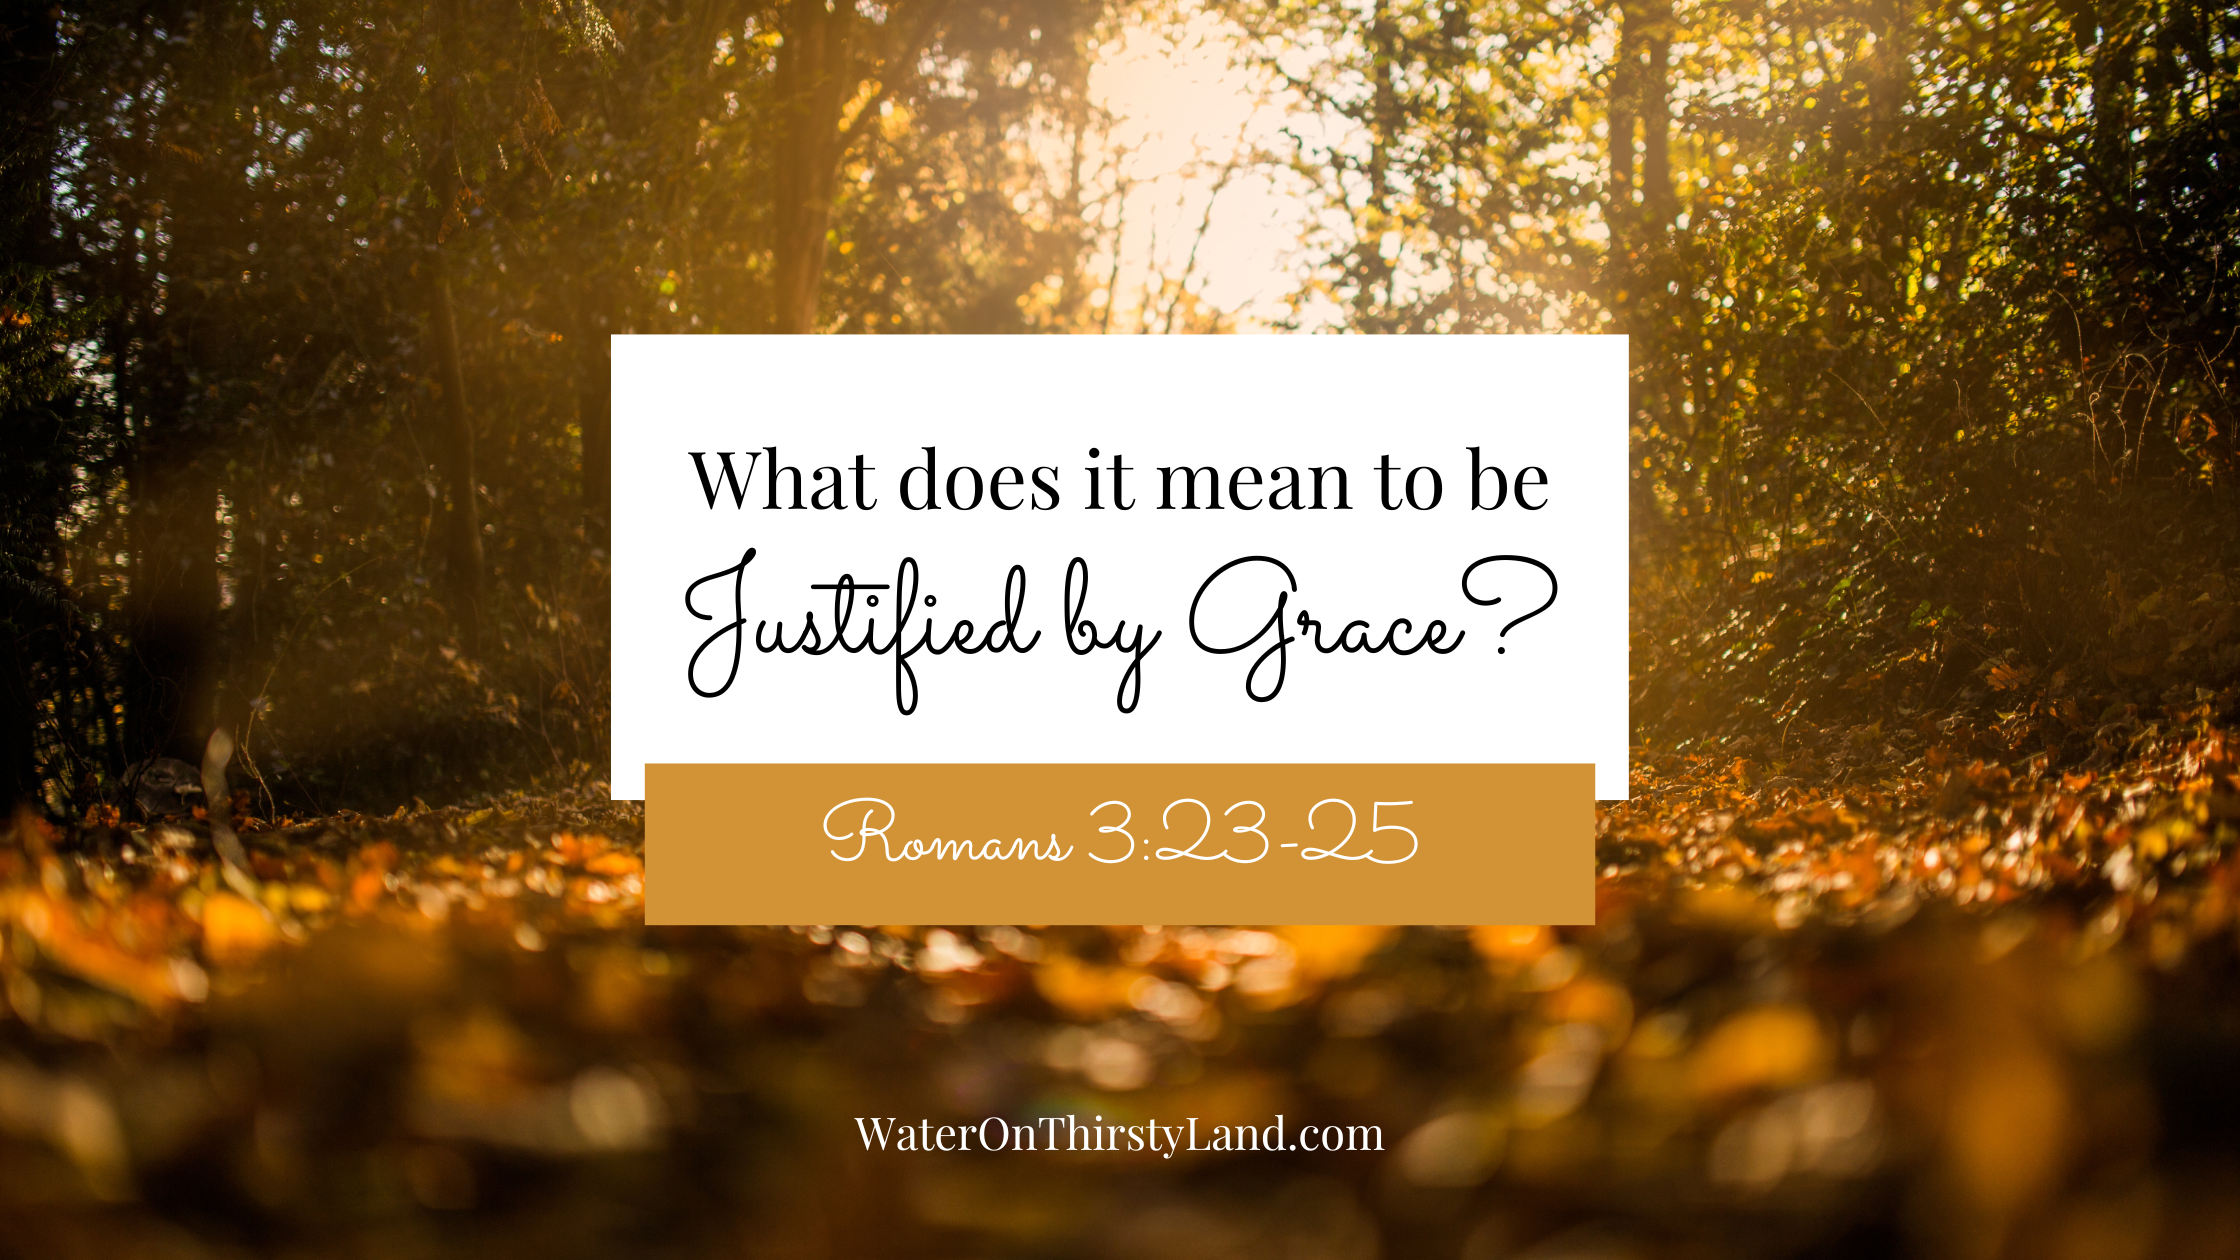 What does it mean to be Justified by Grace